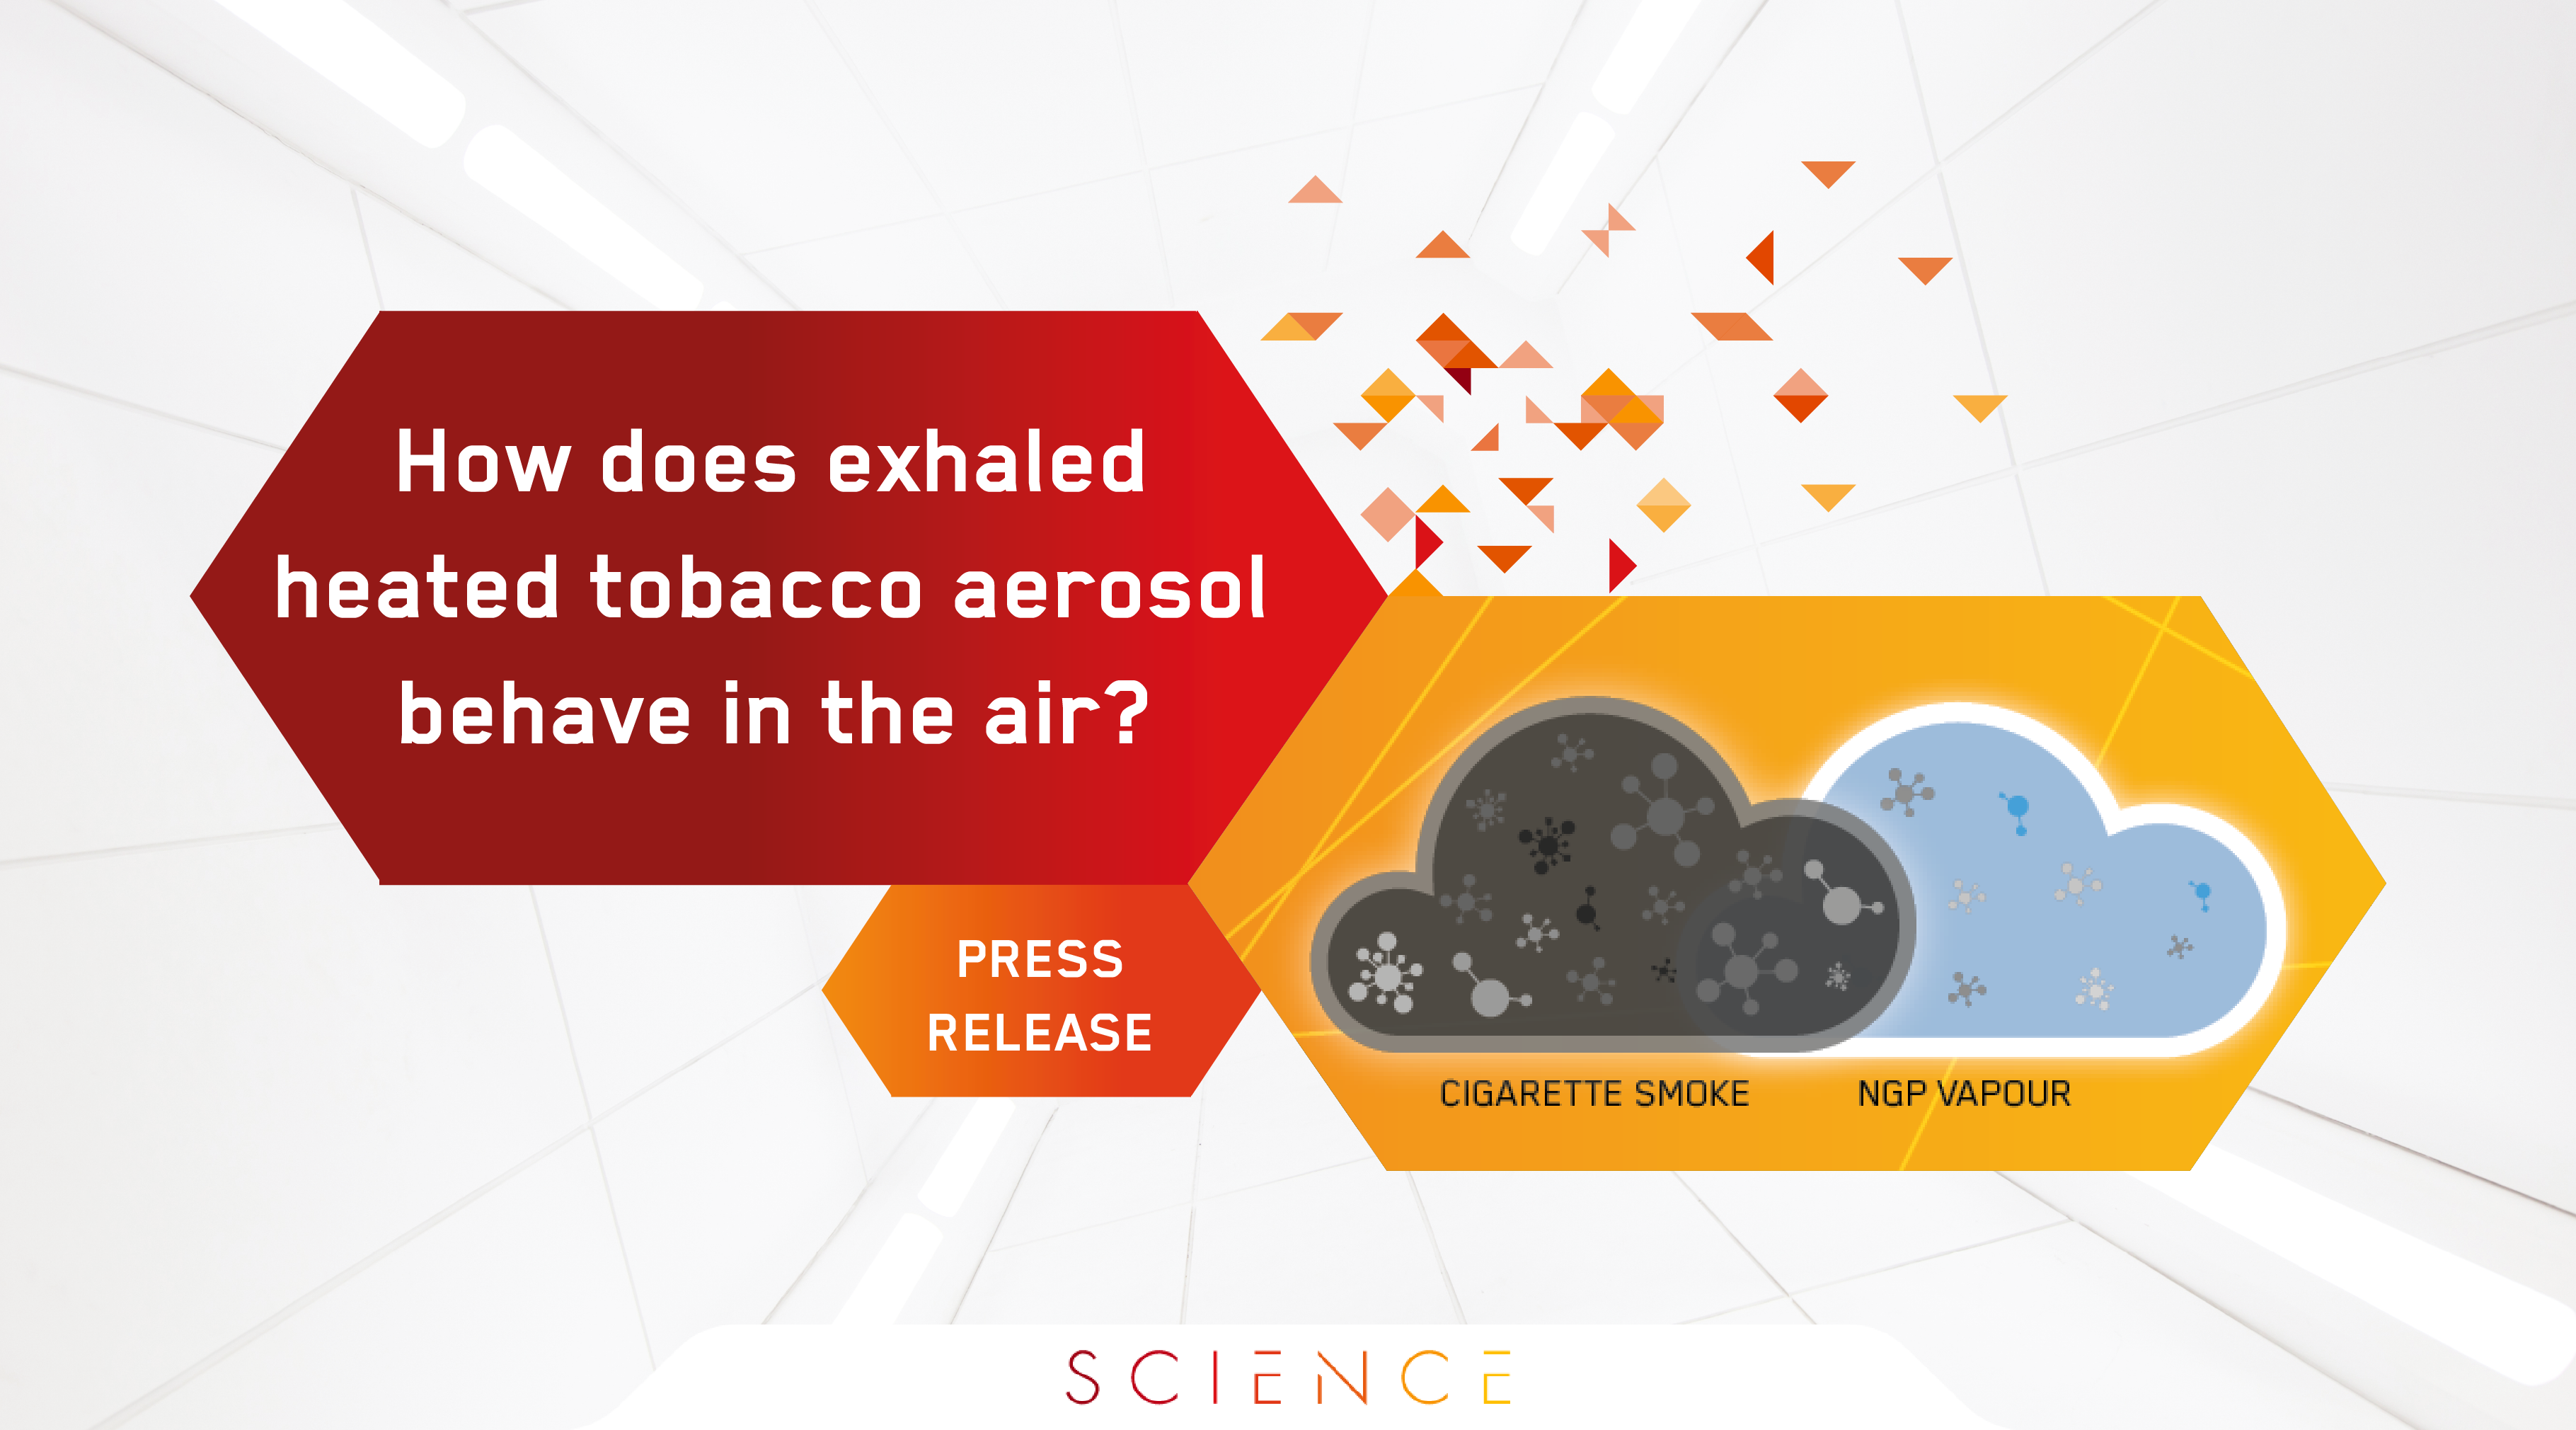 How does exhaled heated tobacco aerosol behave in the air?